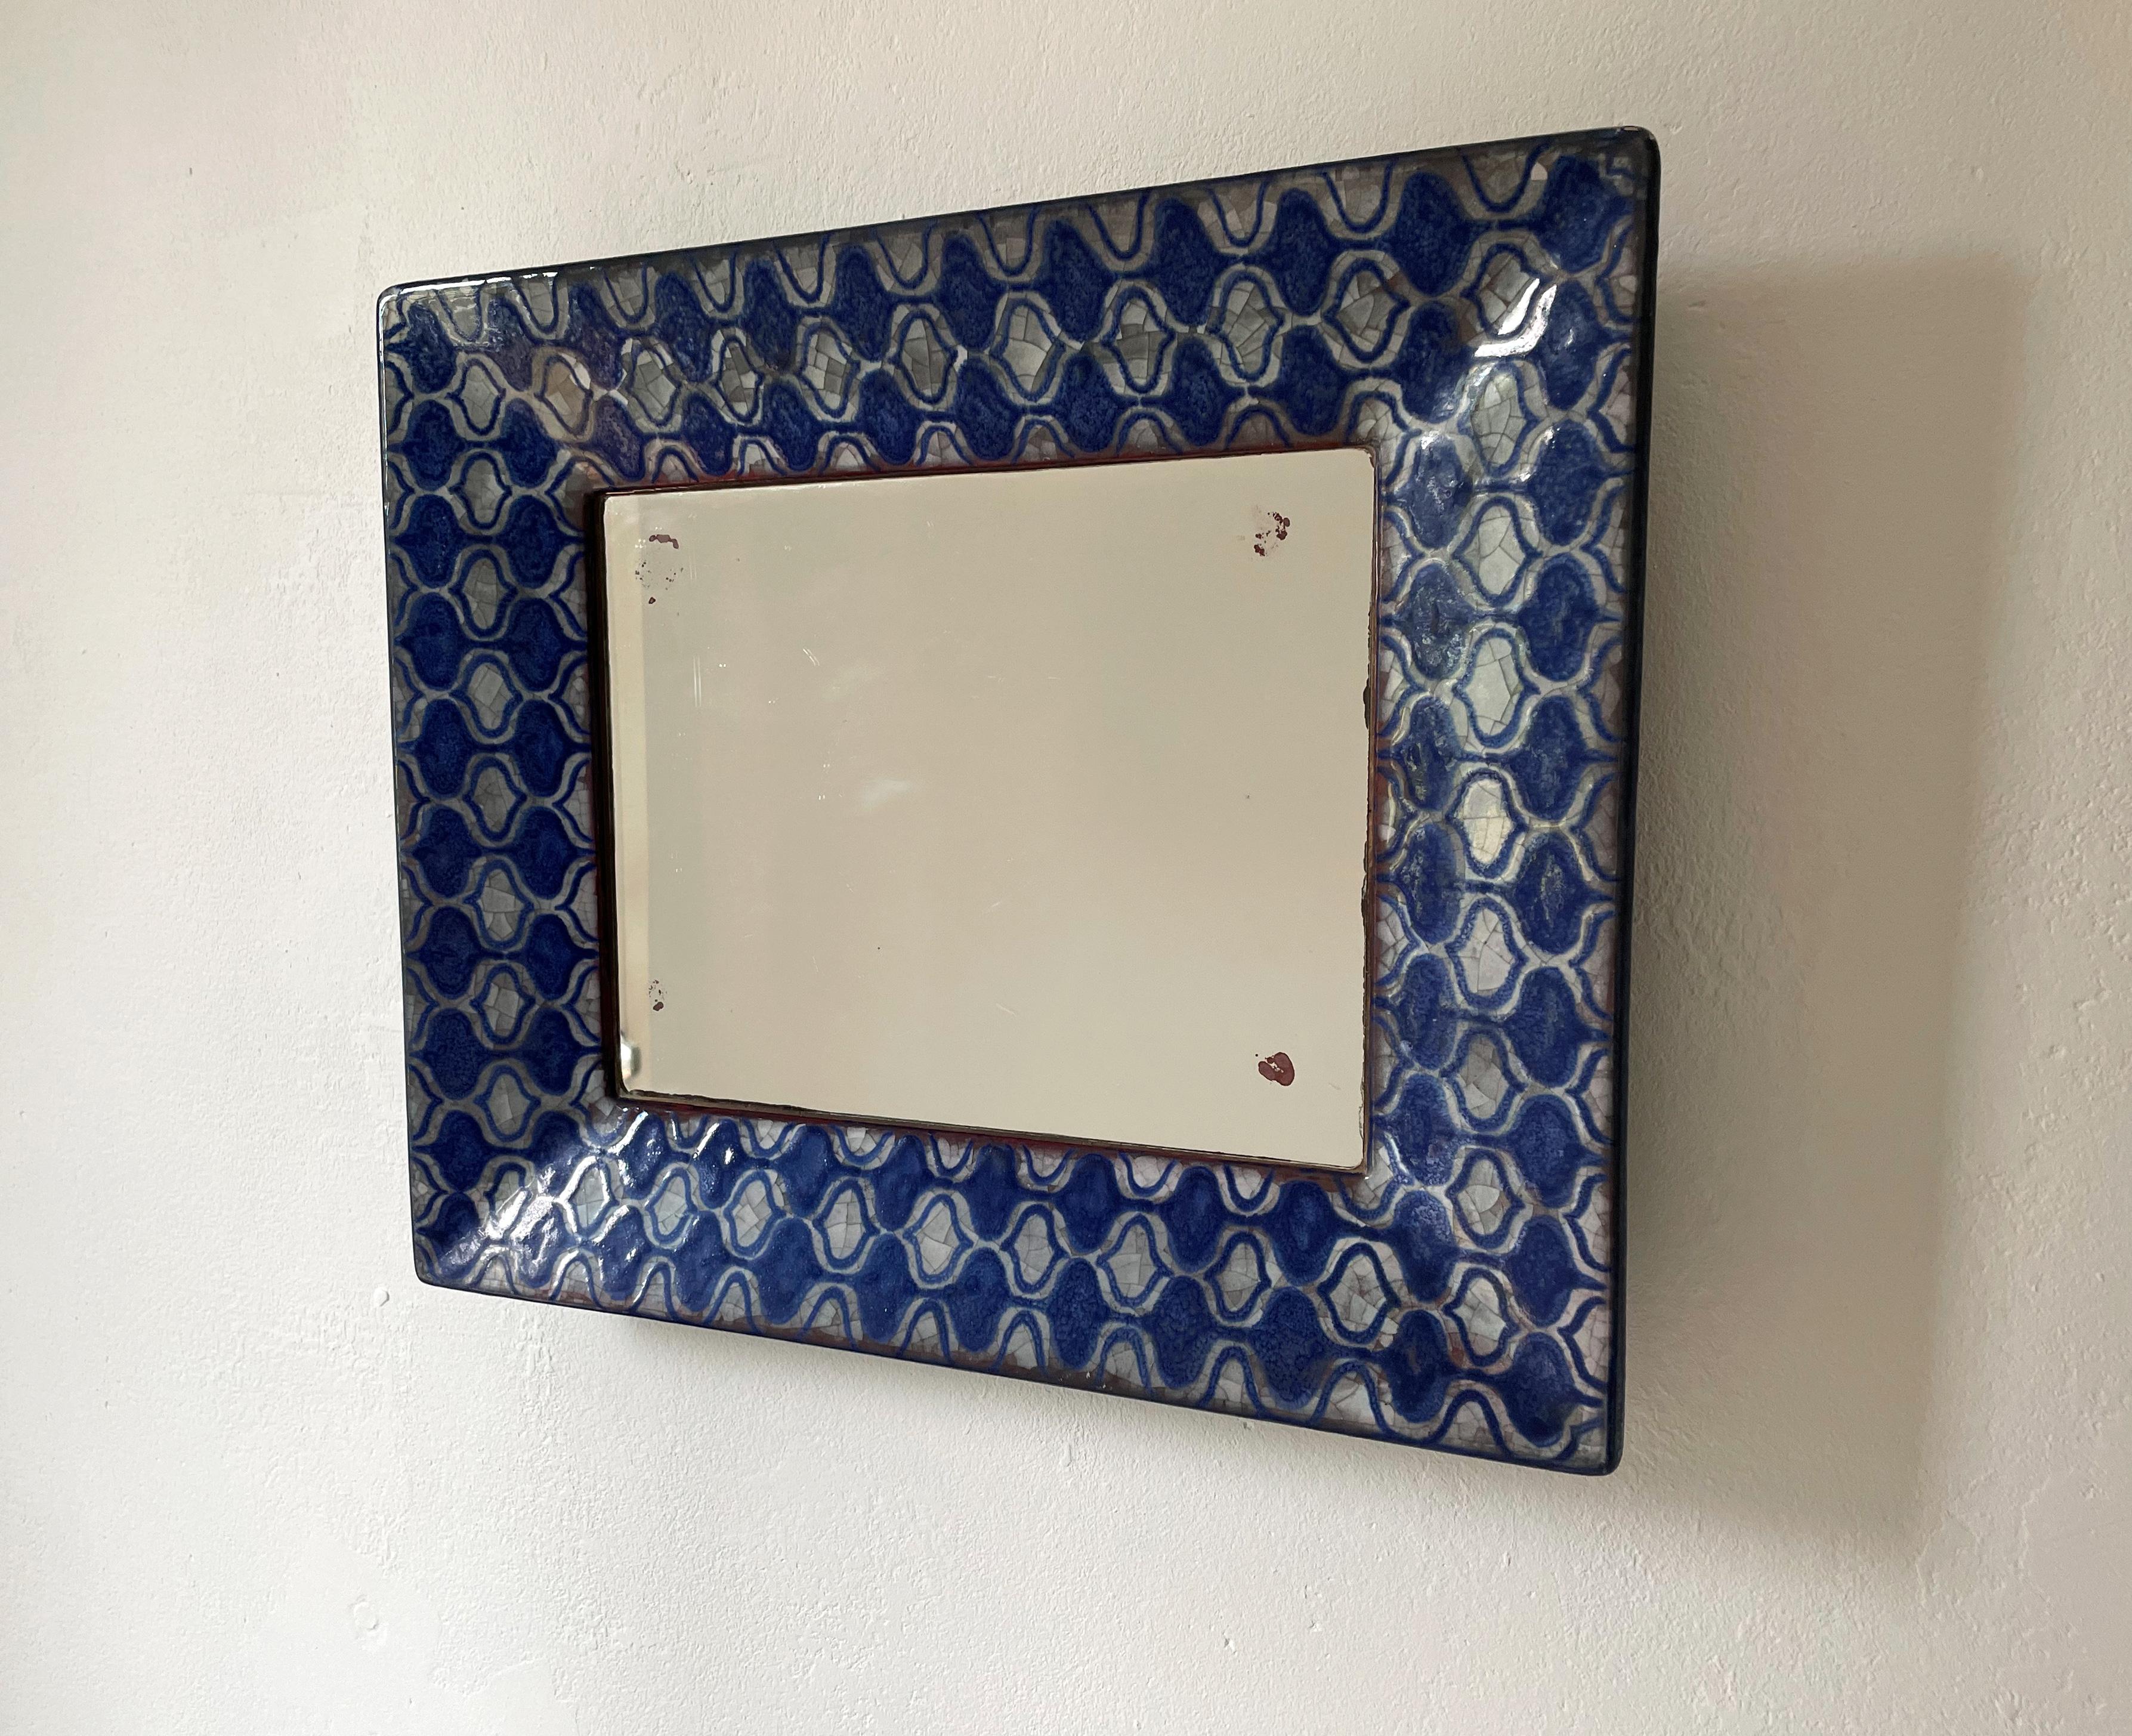 Vintage Persia Glazed Ceramic Wall Mirror, Michael Andersen, 1960s For Sale 1